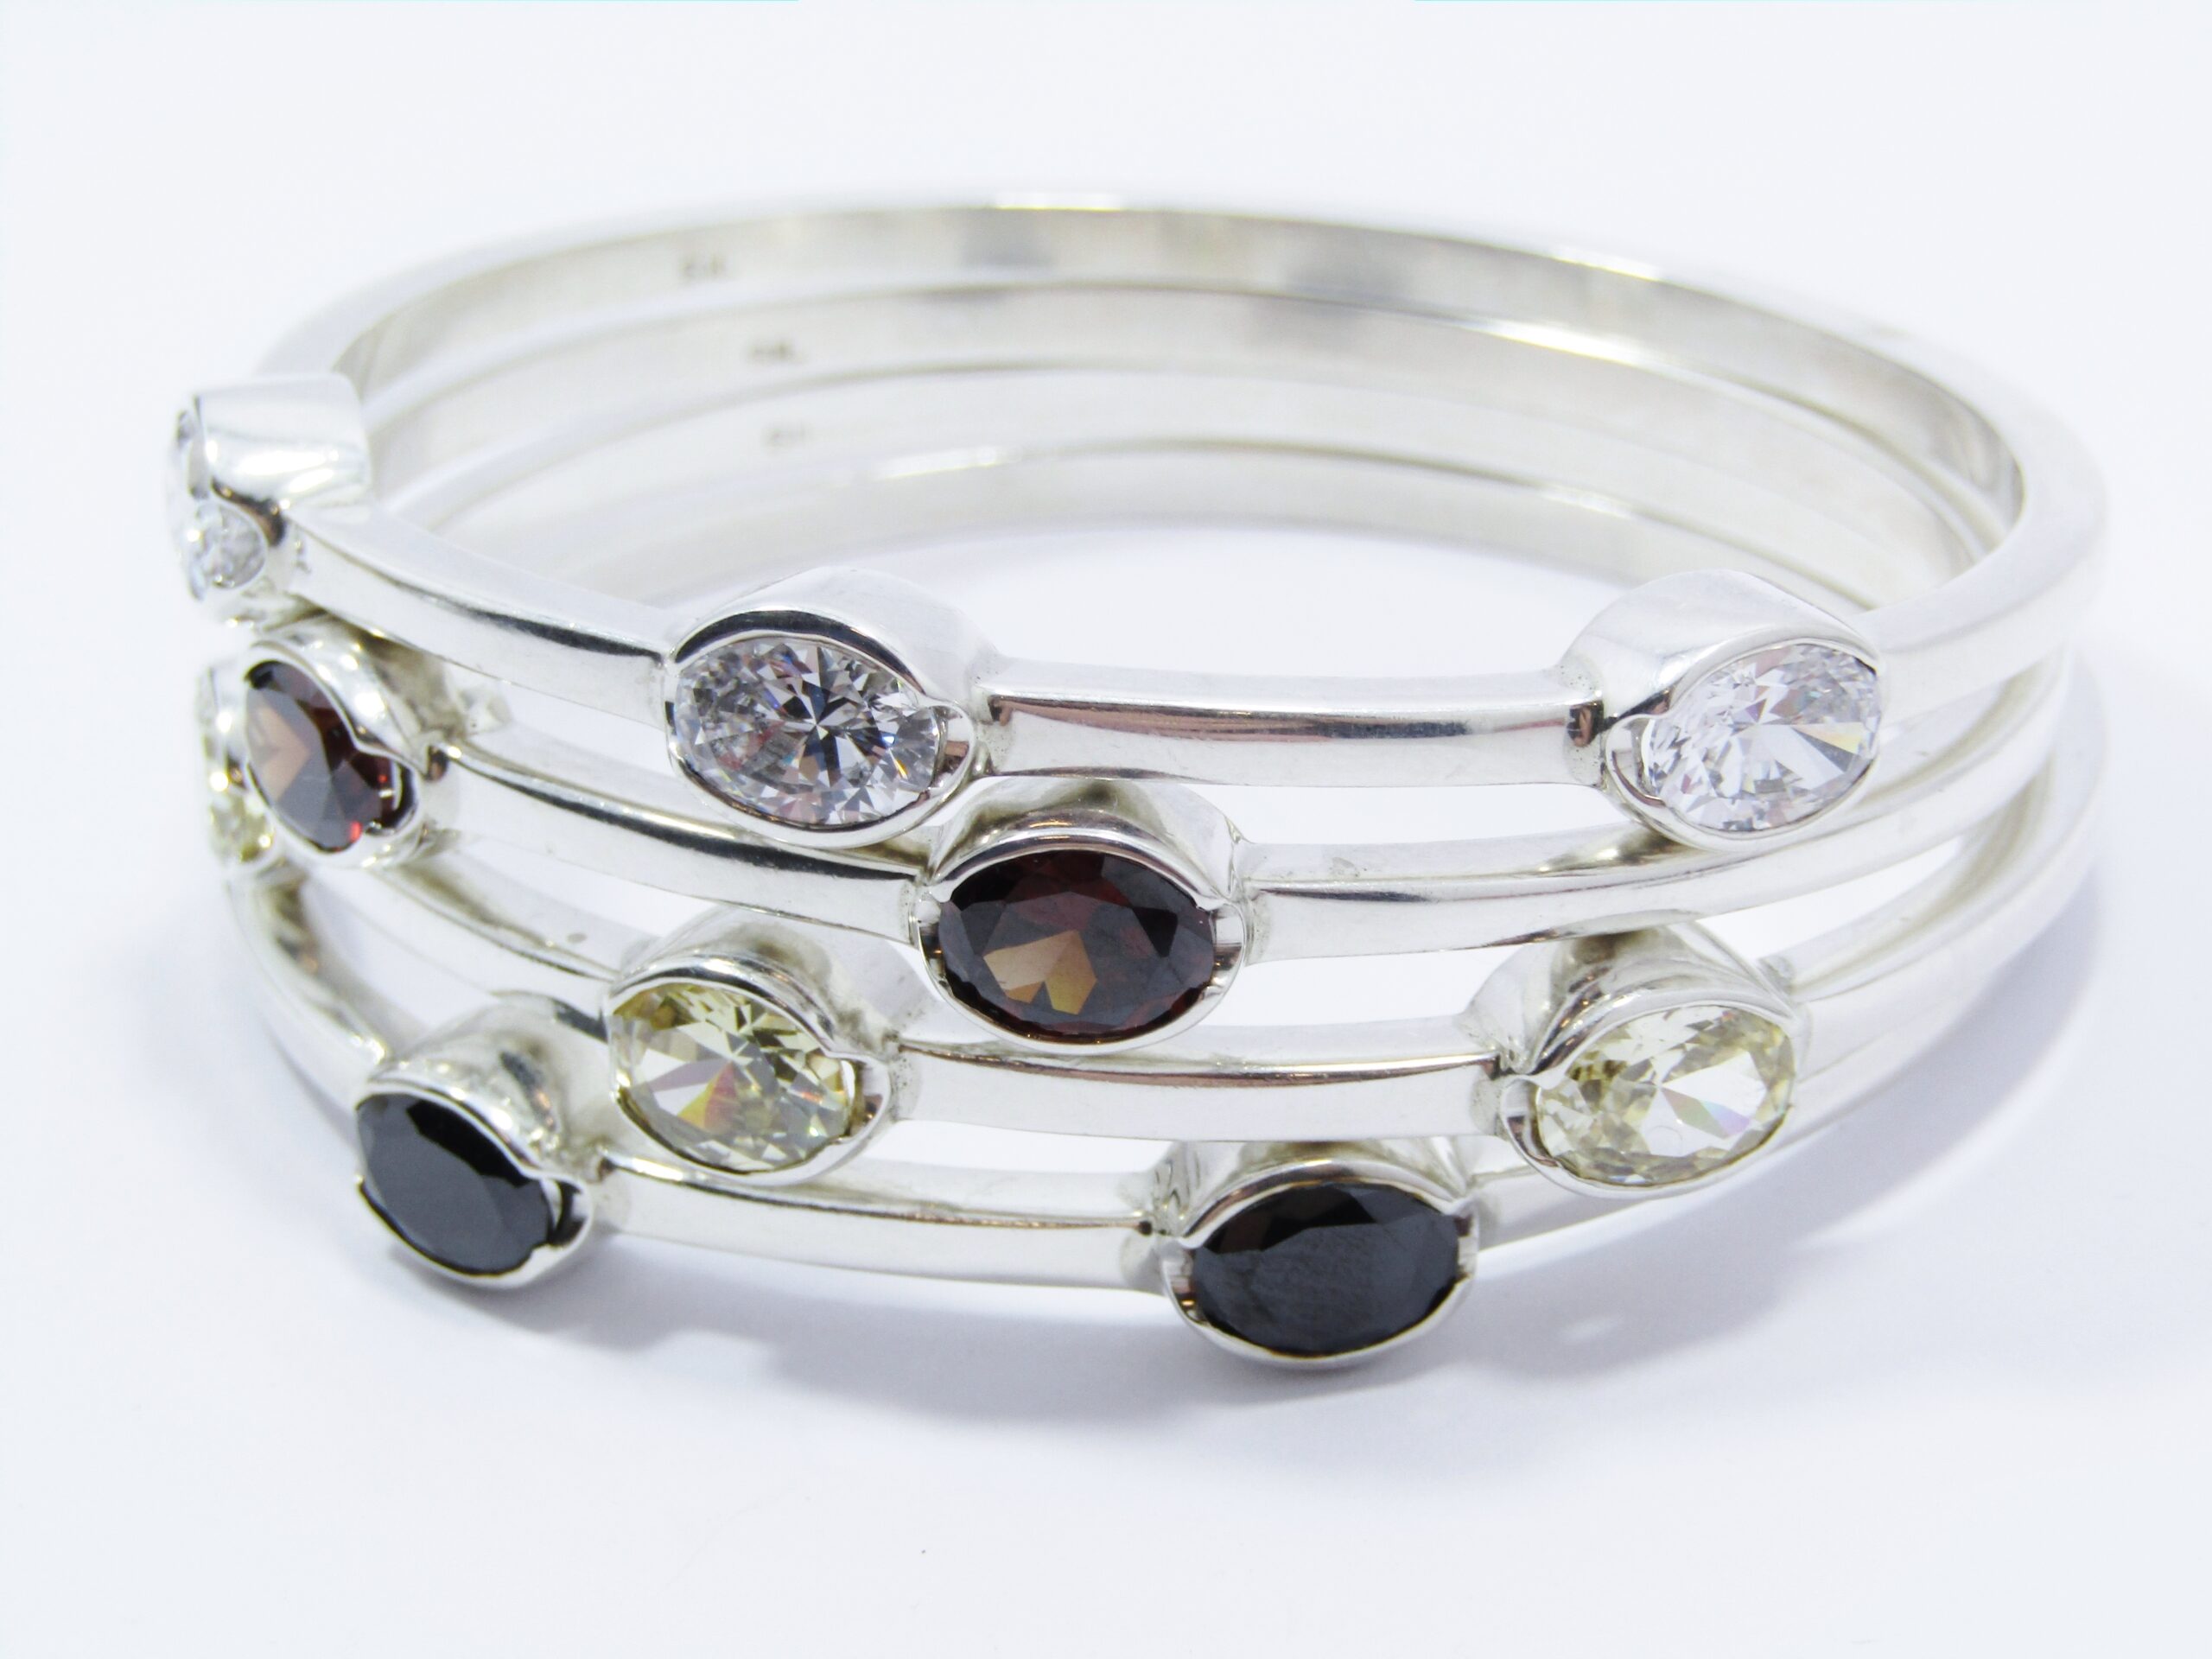 Gorgeous Square Design Chunky Multi Color Zirconia Bangles in Sterling Silver.